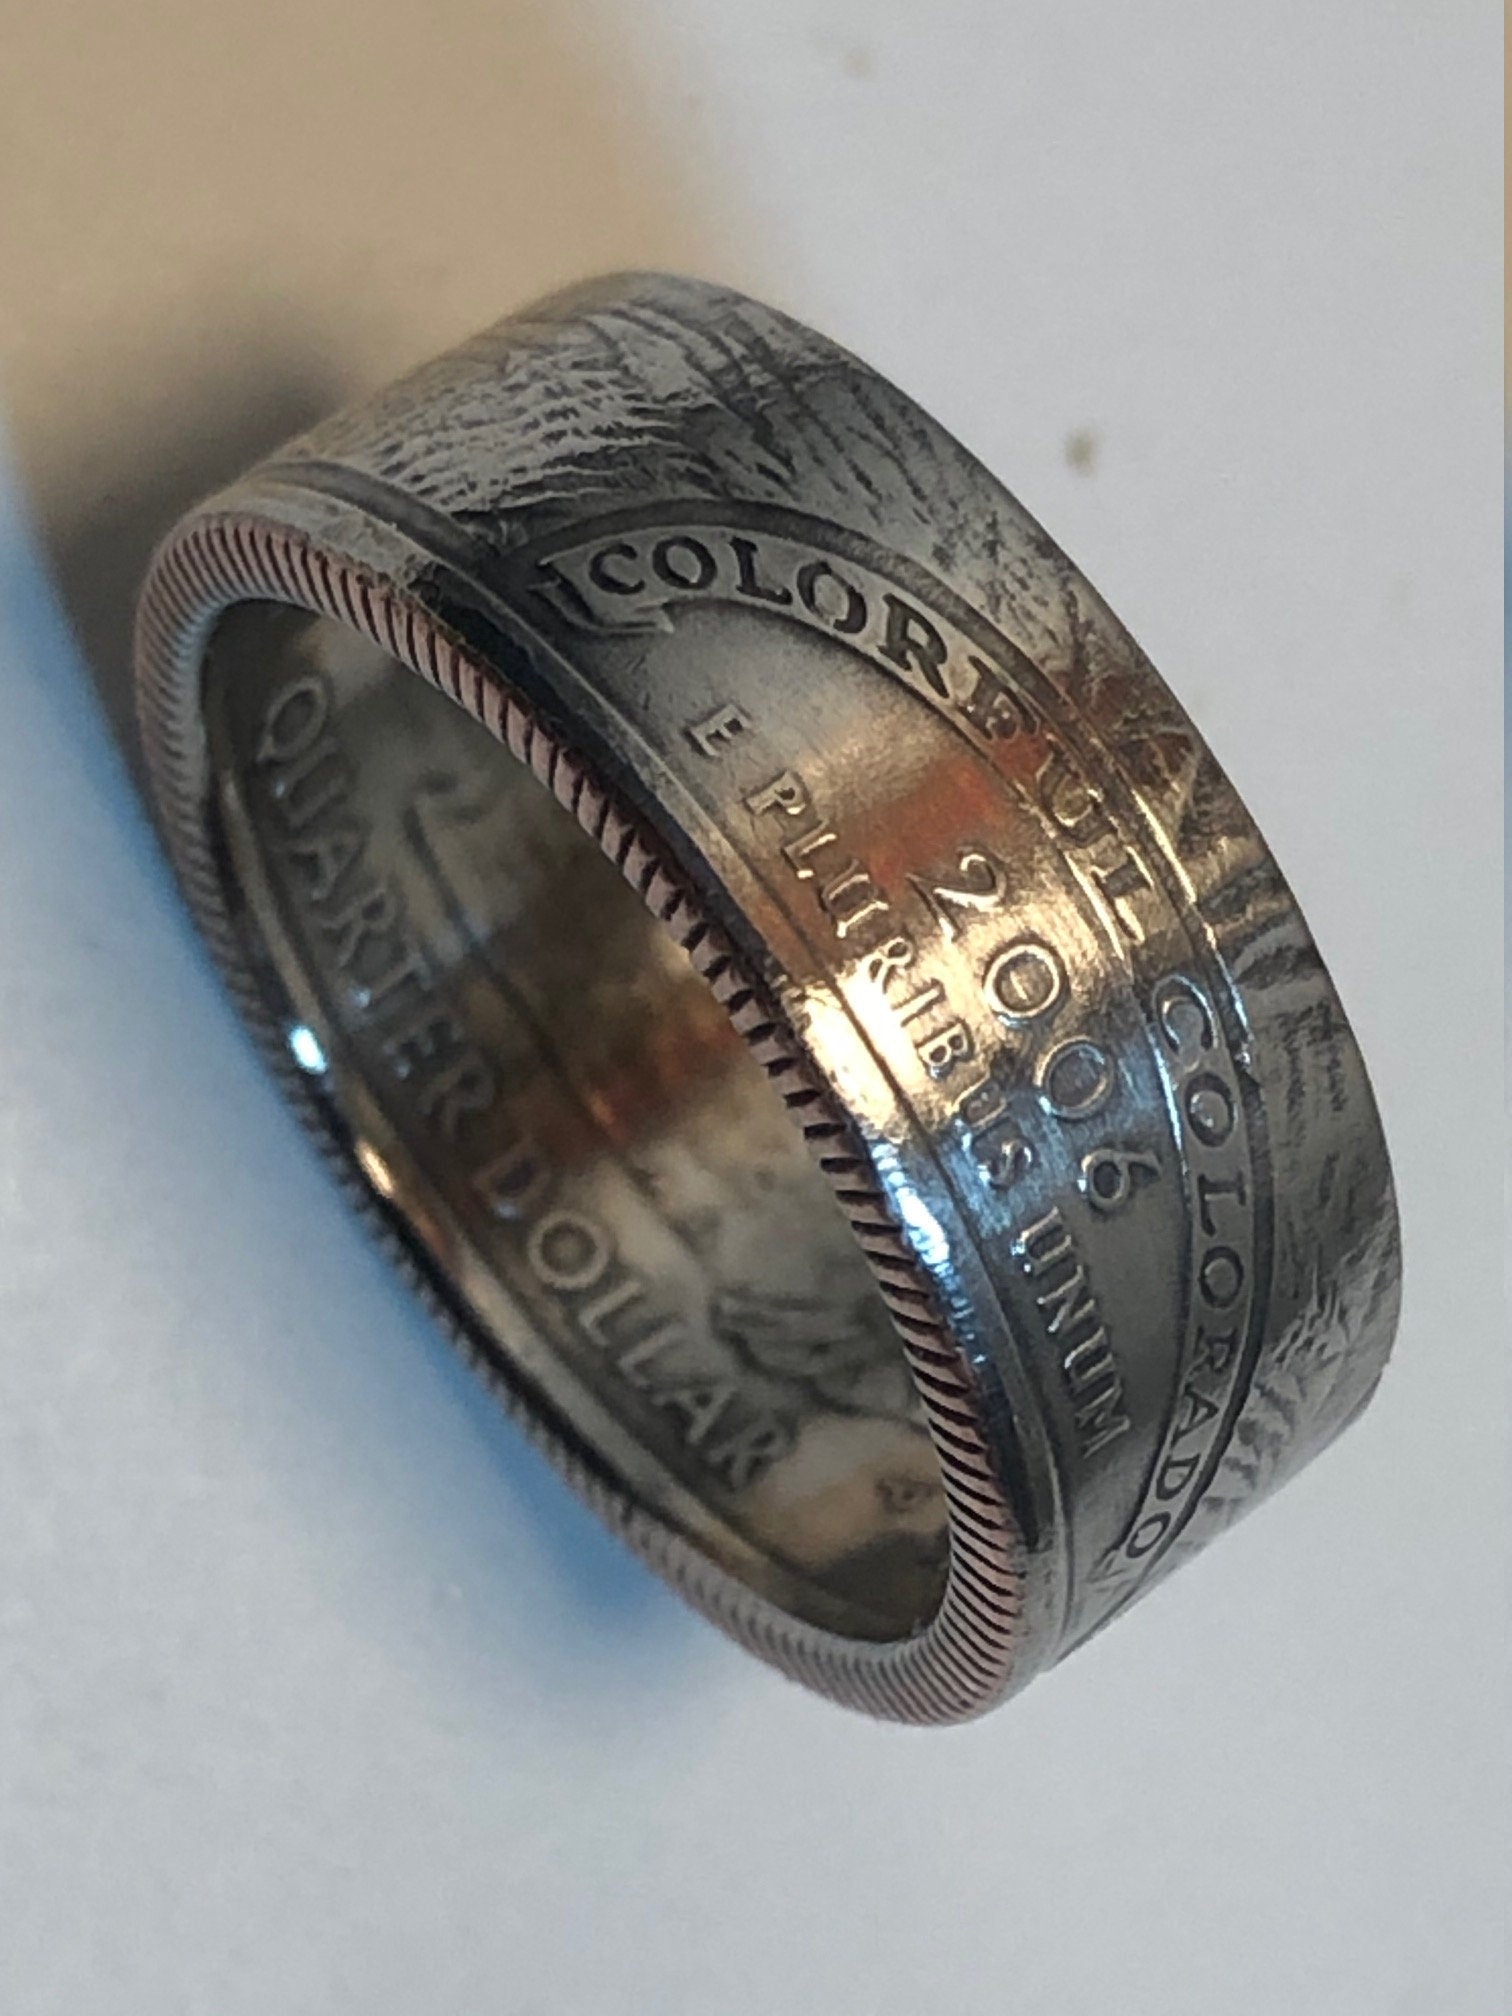 Colorado Ring State Quarter Coin Ring Hand Made